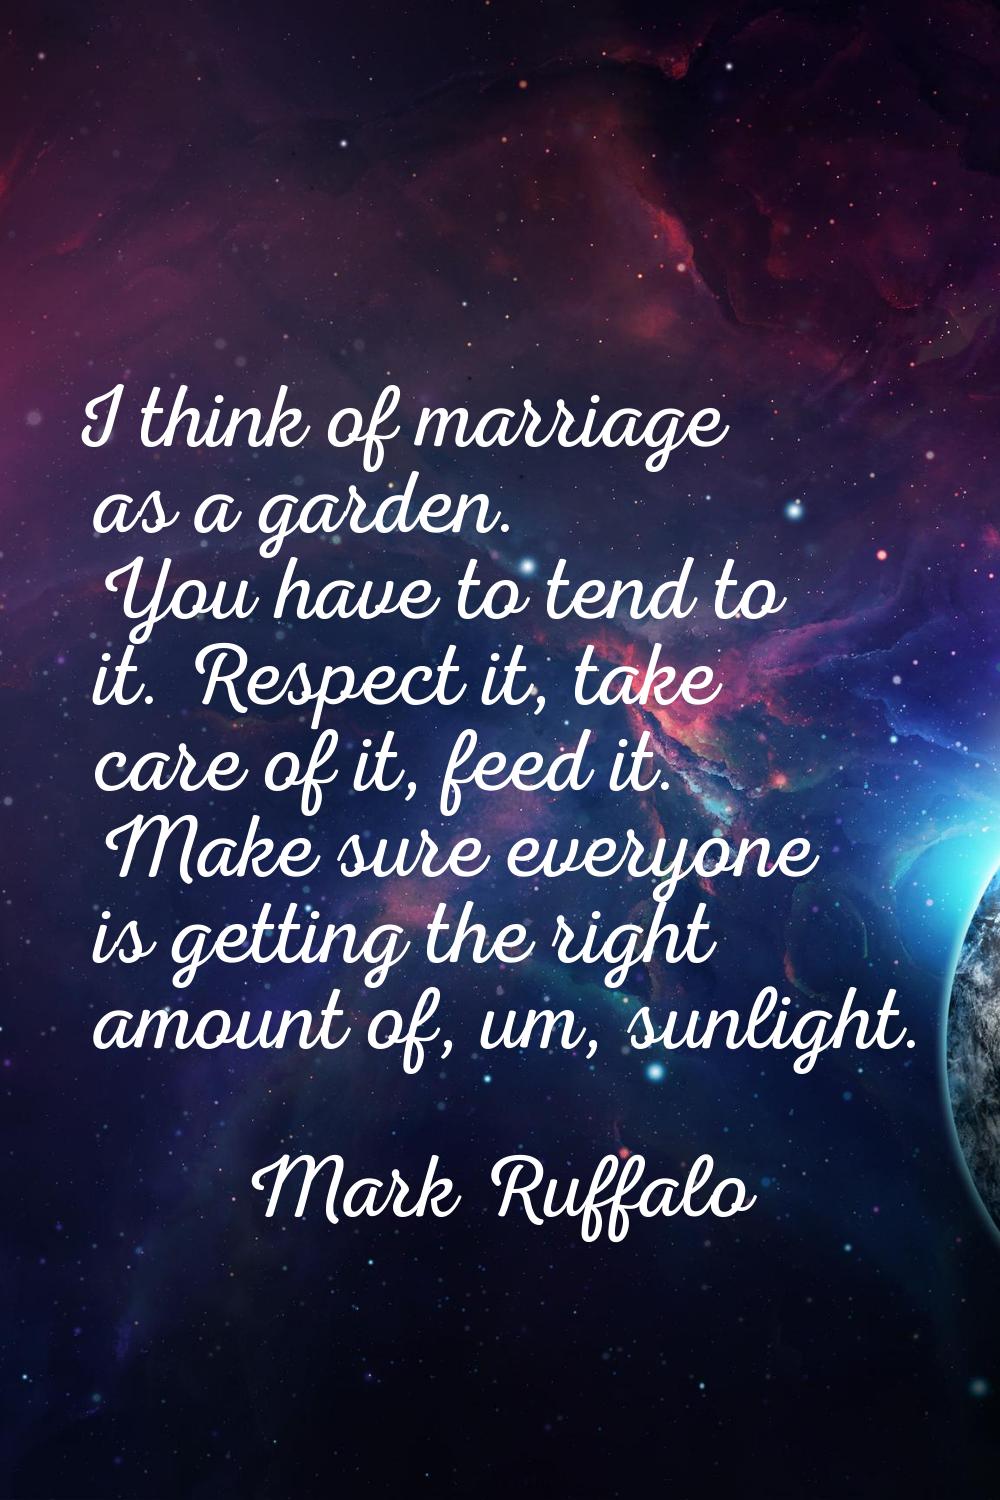 I think of marriage as a garden. You have to tend to it. Respect it, take care of it, feed it. Make